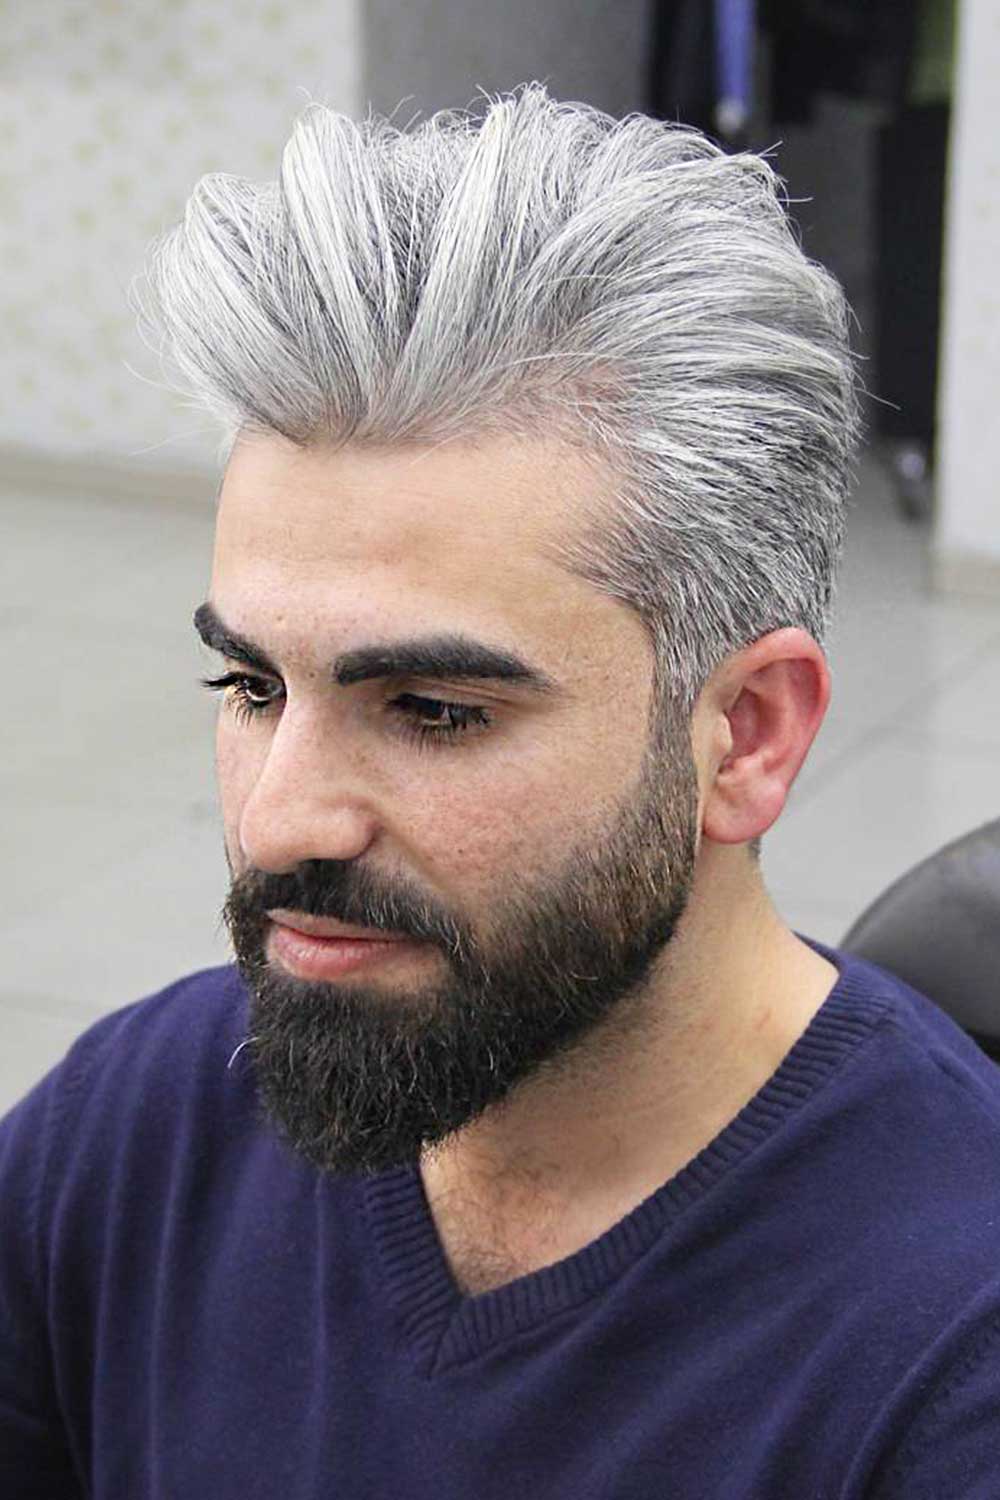 Top 10 Hair Color Trends & Ideas for Men in 2022